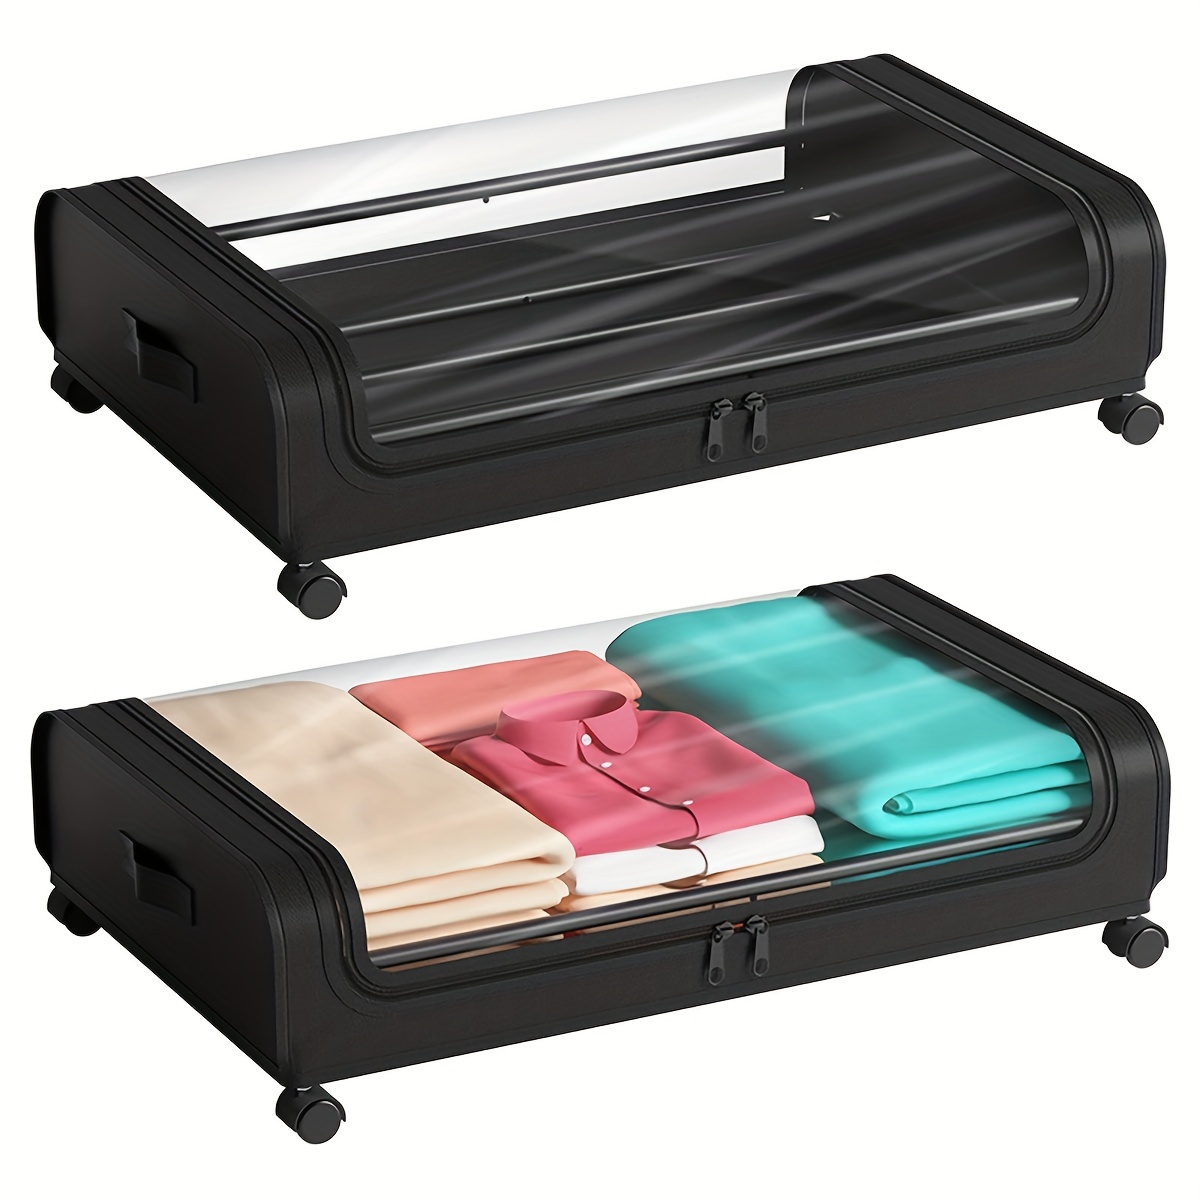 

2 Pcs Under Bed Storage, Under The Bed Storage Containers With Wheels, Transparent Visual Under Bed Shoe Storage Organizer Drawer, Underbed Storage Containers For Bedroom Clothes Shoes Blankets